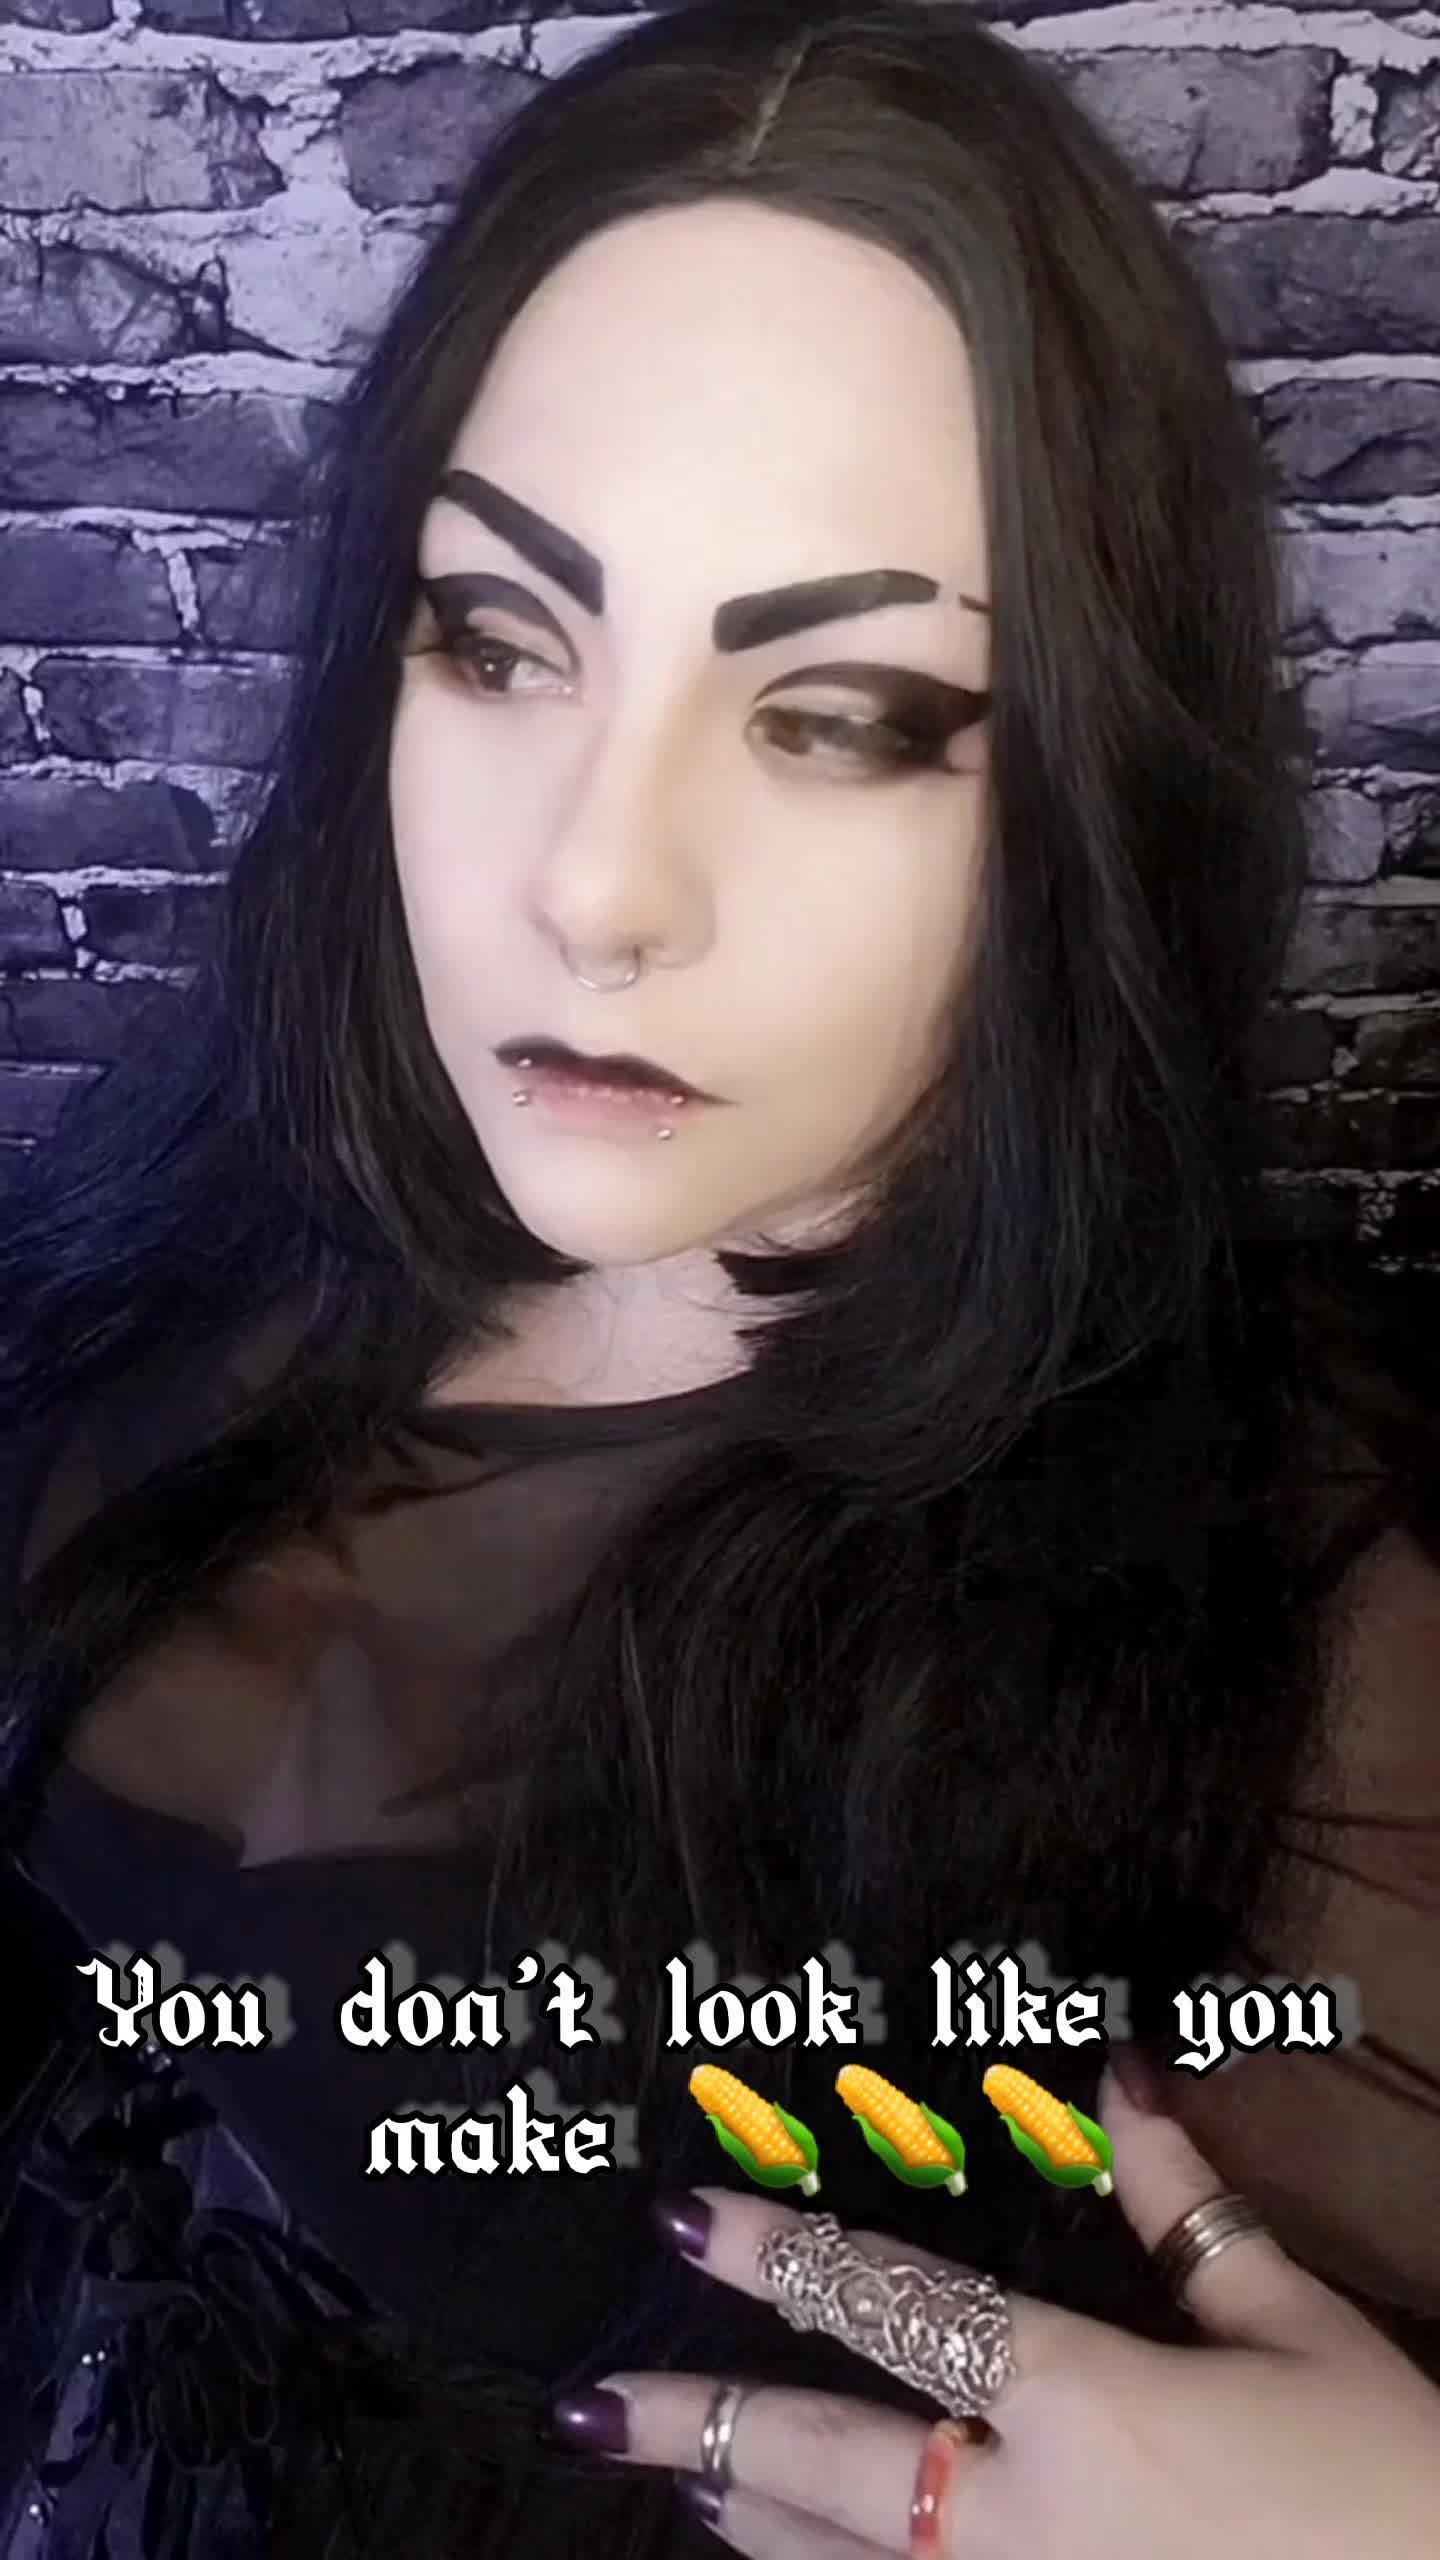 Video by Lilpixie73tiktok with the username @Lilpixie73tiktok, who is a verified user,  October 2, 2022 at 1:48 AM and the text says 'https://onlyfans.com/lilpixie73
Join for only 10$ 🔓
#bbw #goth #cosplay #juicypussy #juicy #panties #penetracion #masterbation #onlyfans #nsfwtwt #tittyplay #spicysite #gothfetish #squirting #vapefetish #erotic #xxx #gaping #adultcontent #plussize..'